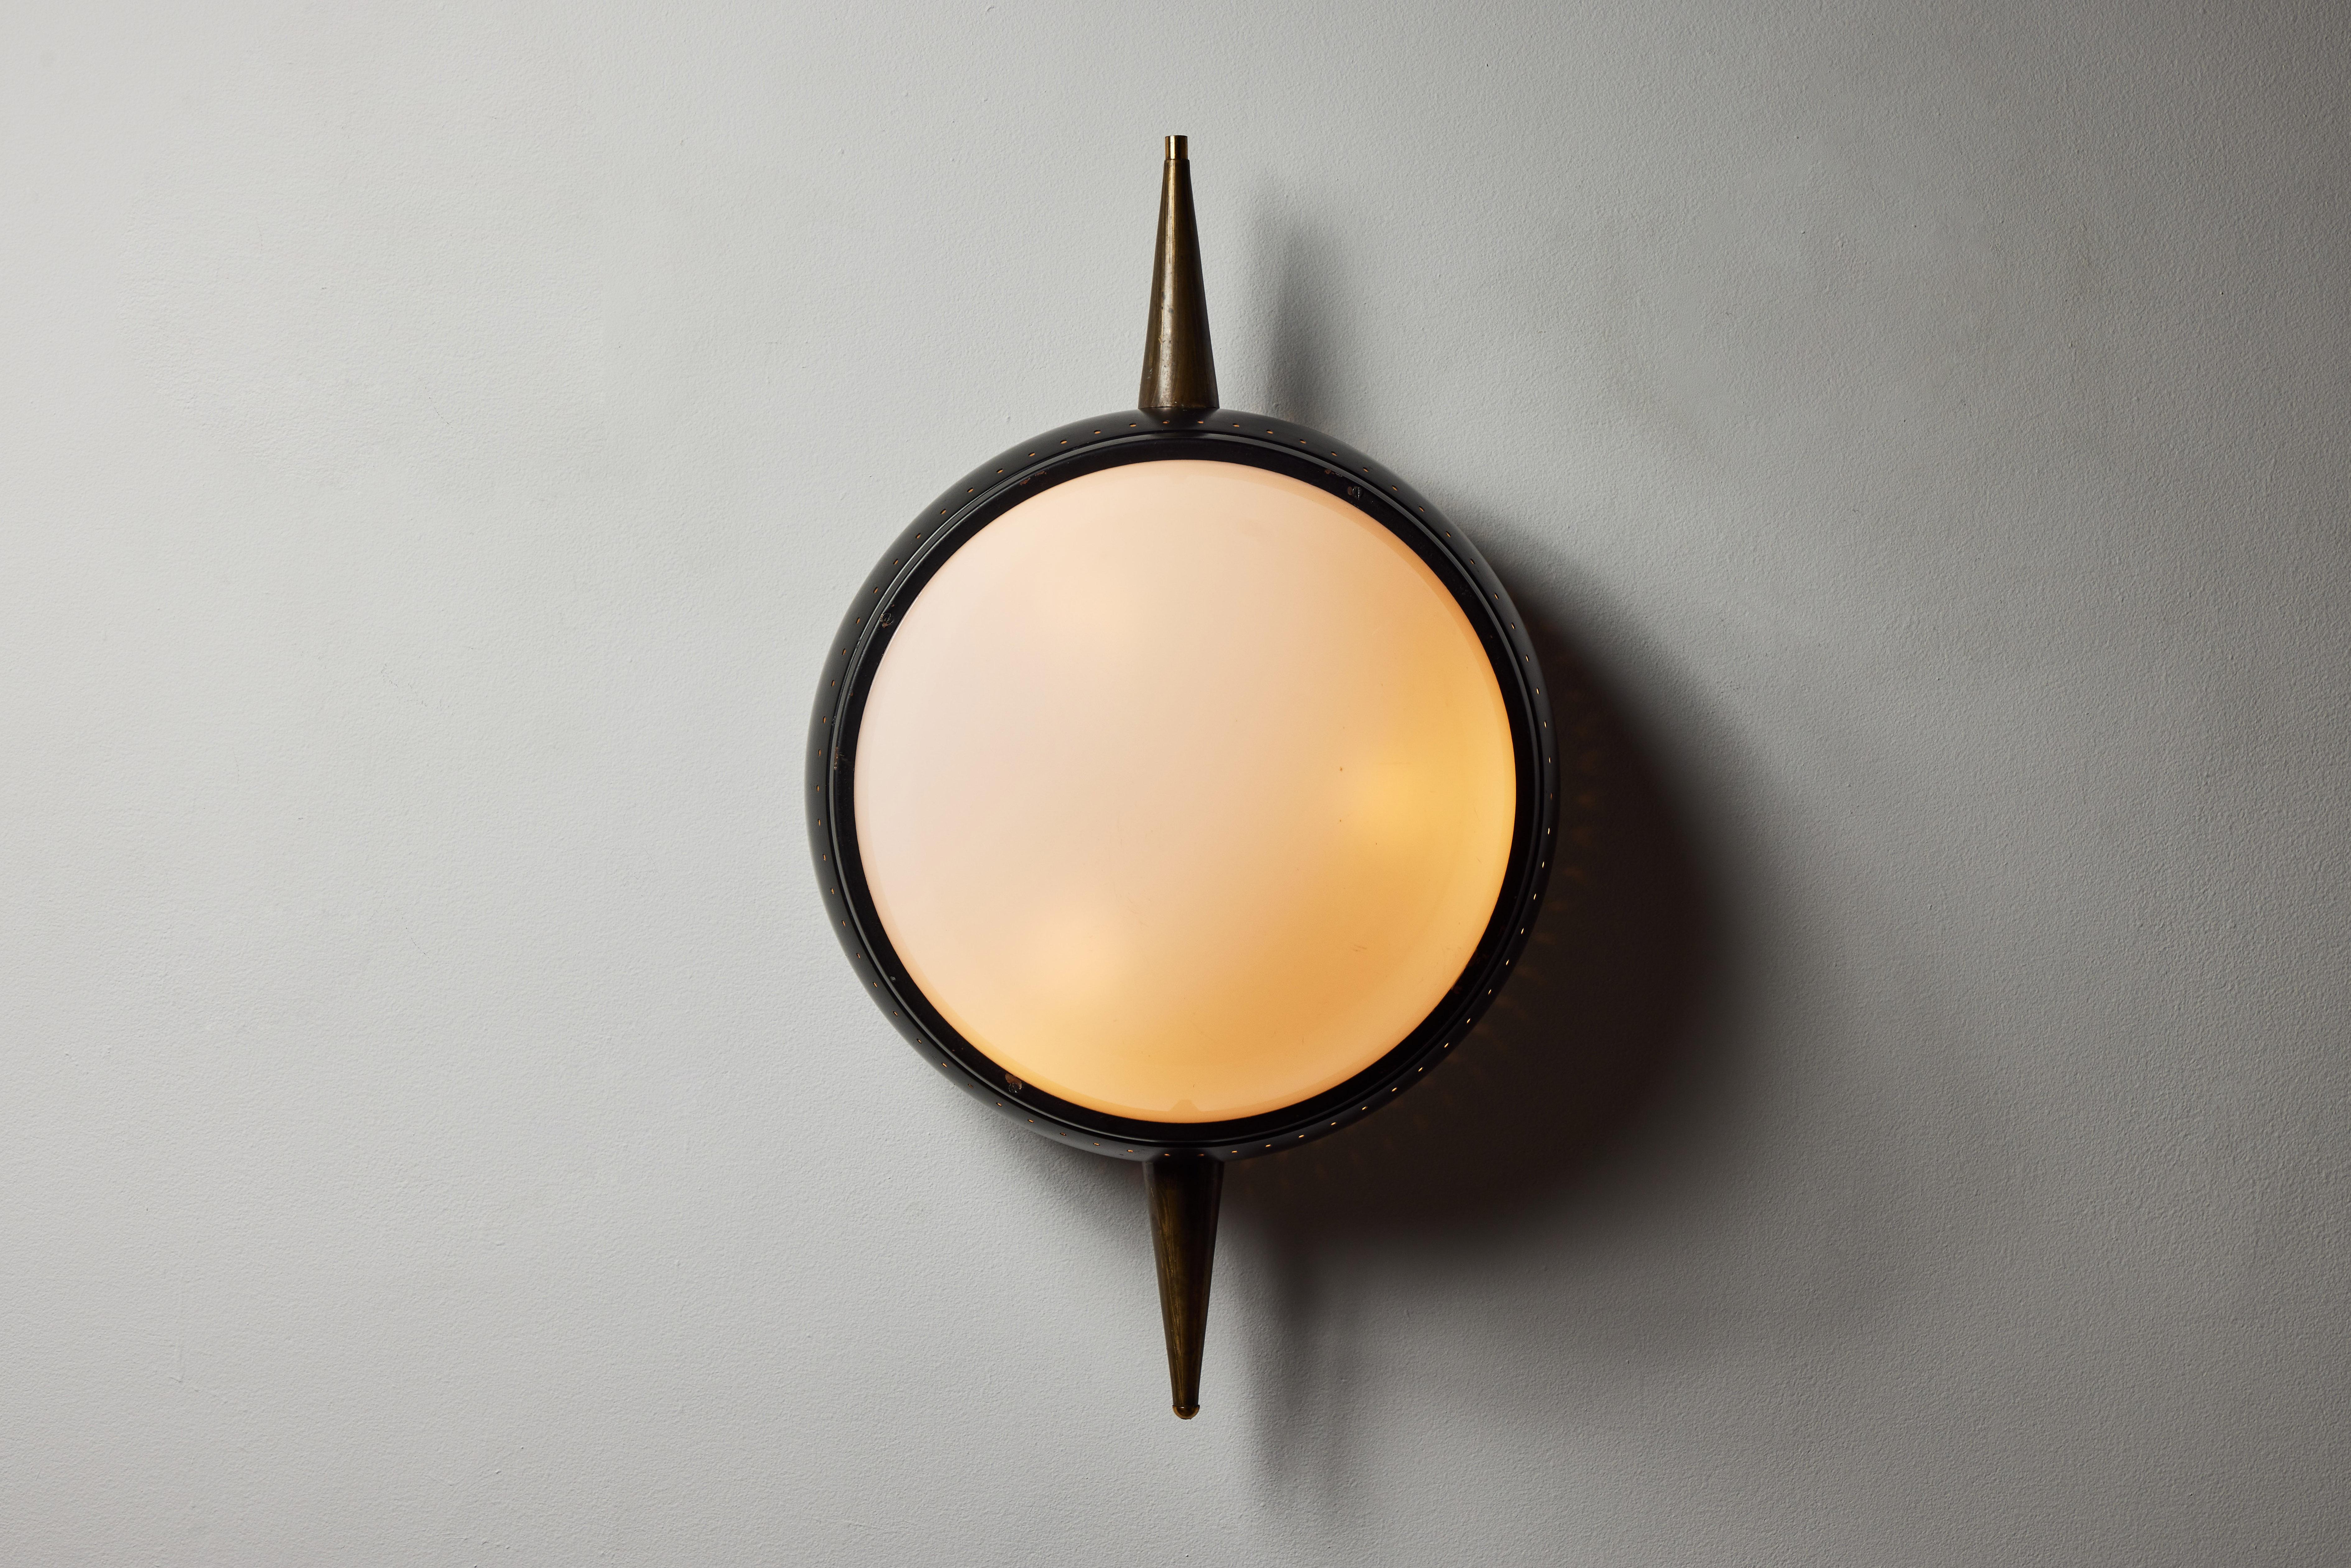 Wall light by Oscar Torlasco. Designed and manufactured in Italy, circa 1950s. Opal glass diffusers, painted metal, brass. Wired for U.S. standards. We recommend three E14 25w maximum bulbs. Bulbs provided as a one time courtesy.